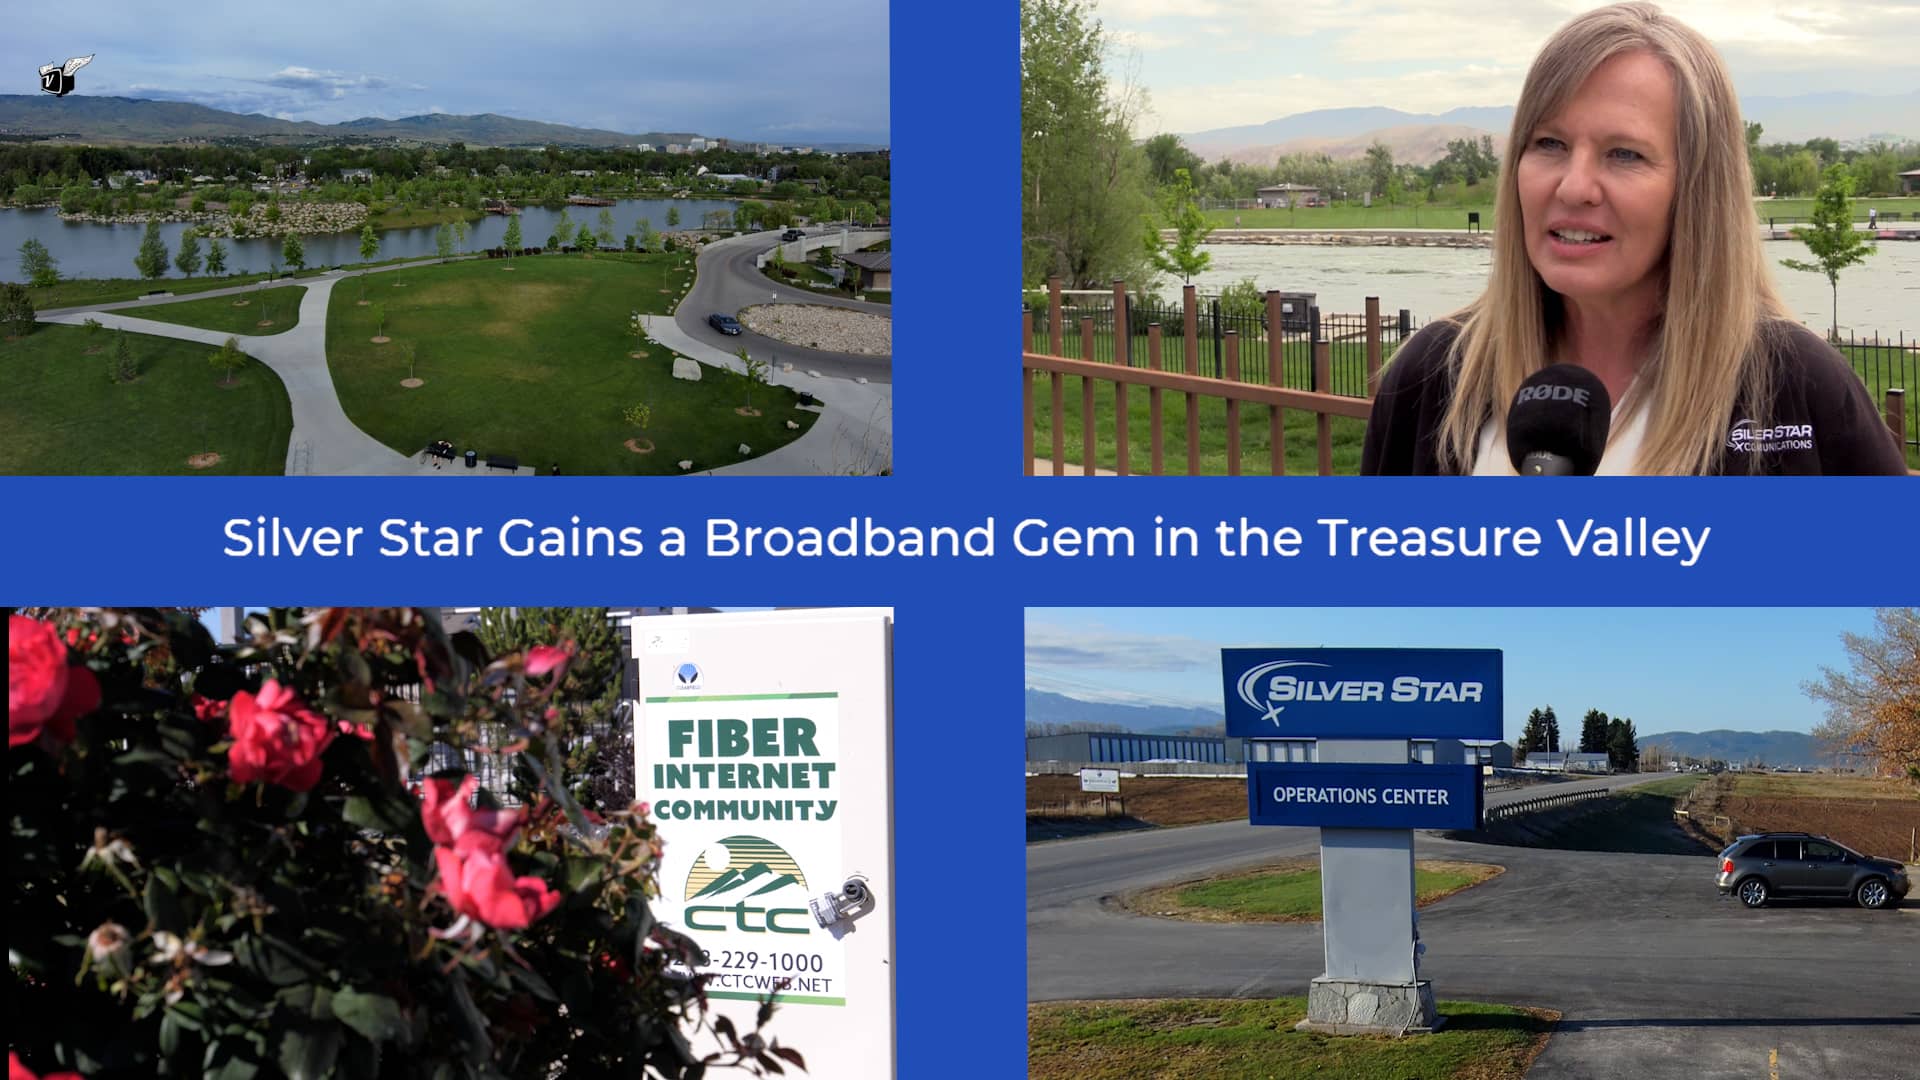 Images of the Treasure Valley and of Silver Star Communications and CTC Telecom, its recent acquisition.